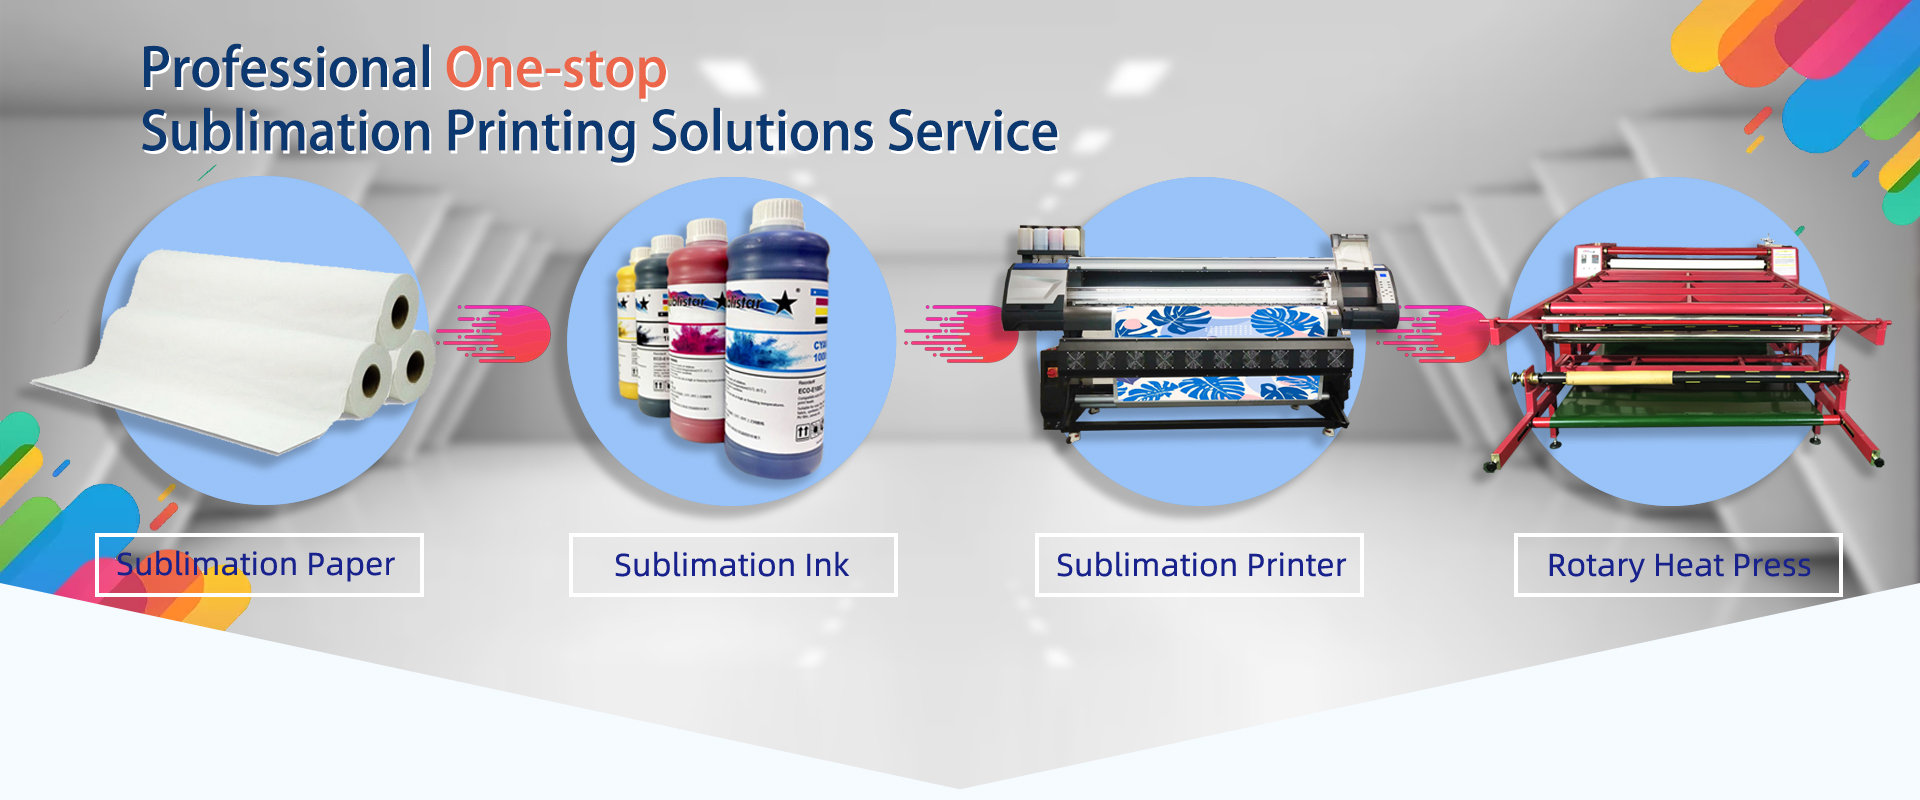 using the sublimation ink attention